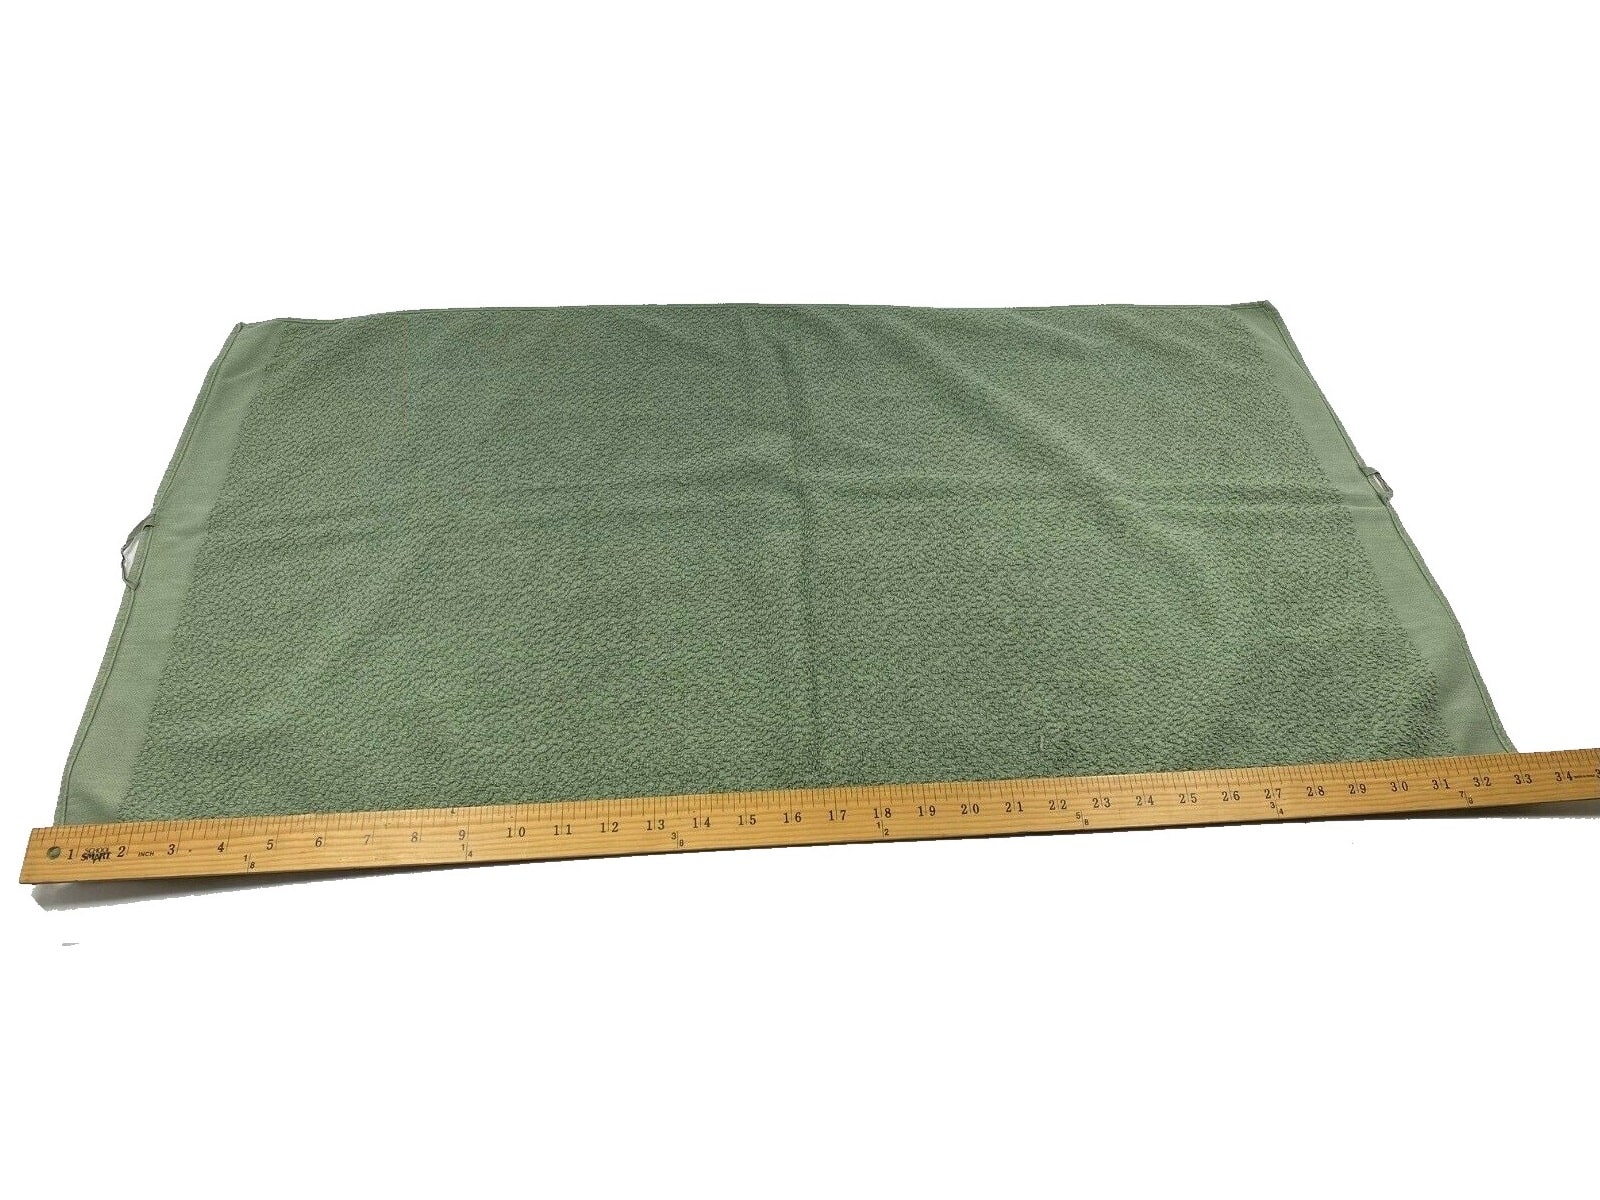 NEW LARGE MILITARY OLIVE TOWEL CAMPING BUSHCRAFT h 